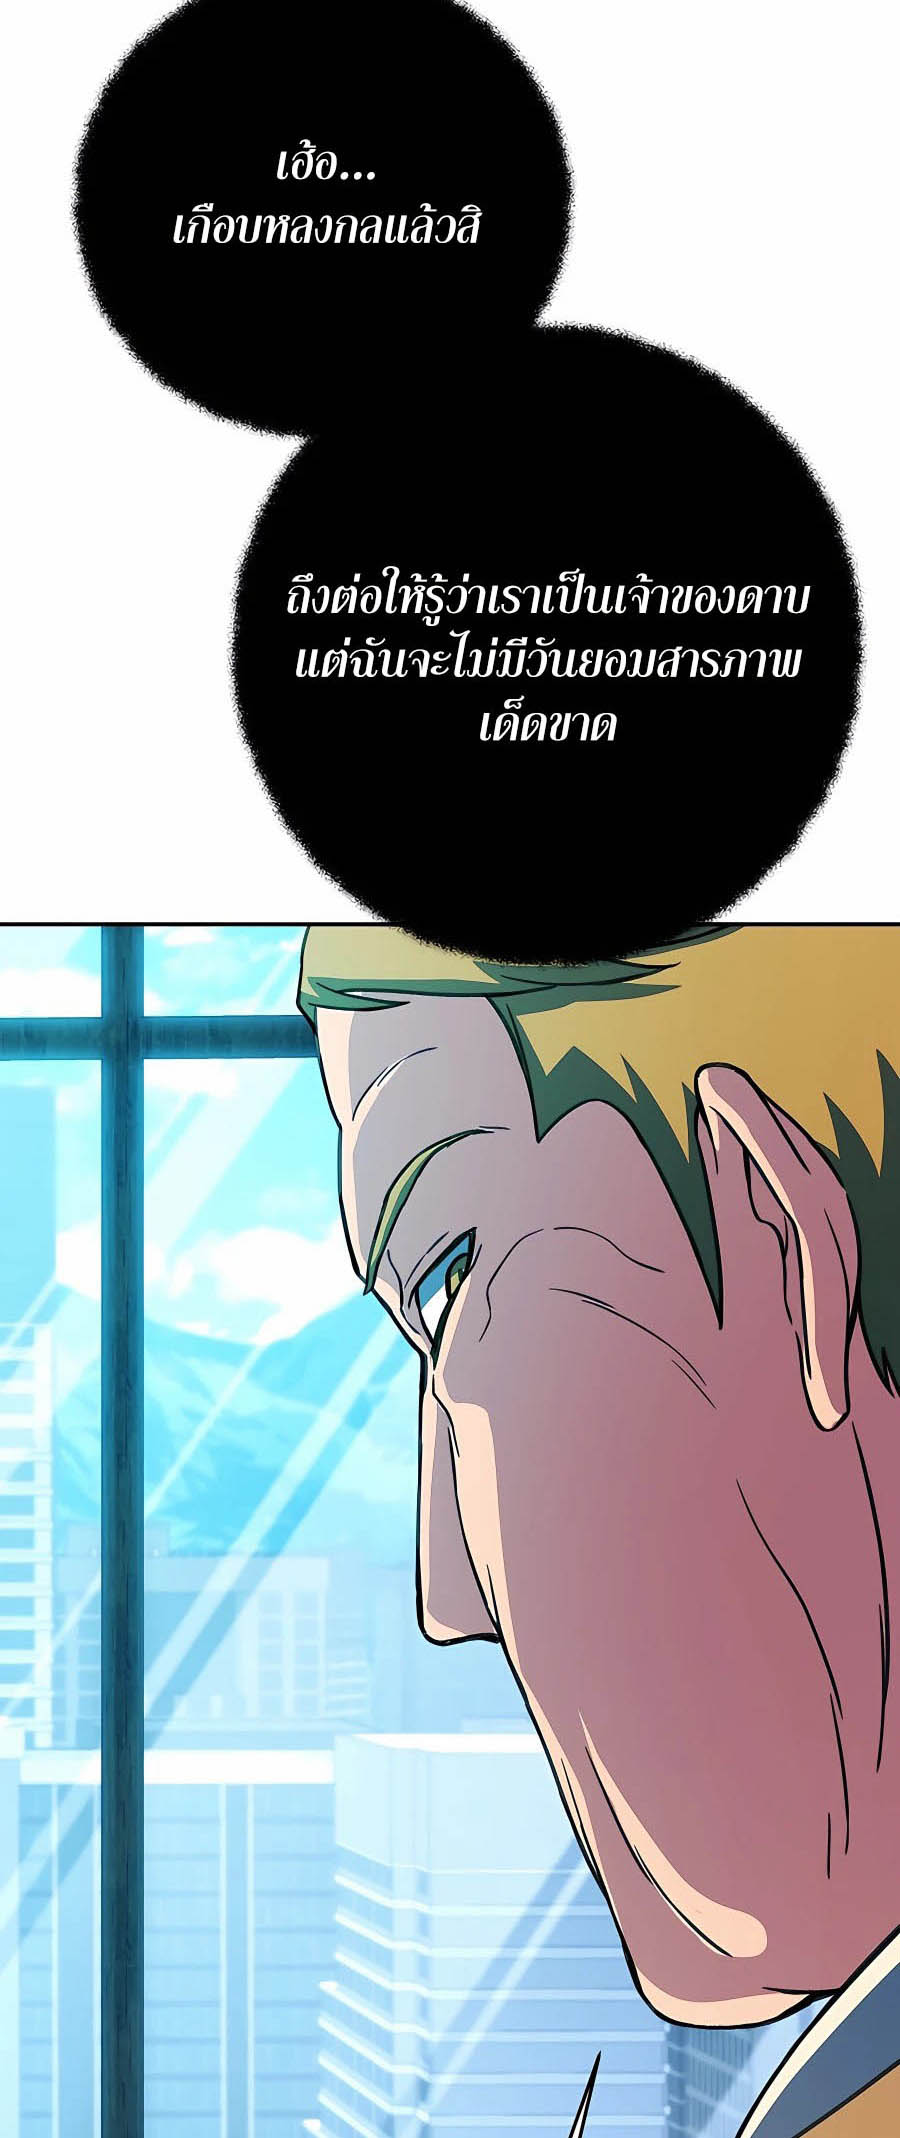 à¸­à¹ˆà¸²à¸™à¸¡à¸±à¸™à¸®à¸§à¸² à¹€à¸£à¸·à¹ˆà¸­à¸‡ The Part Time Land of the Gods 56 41